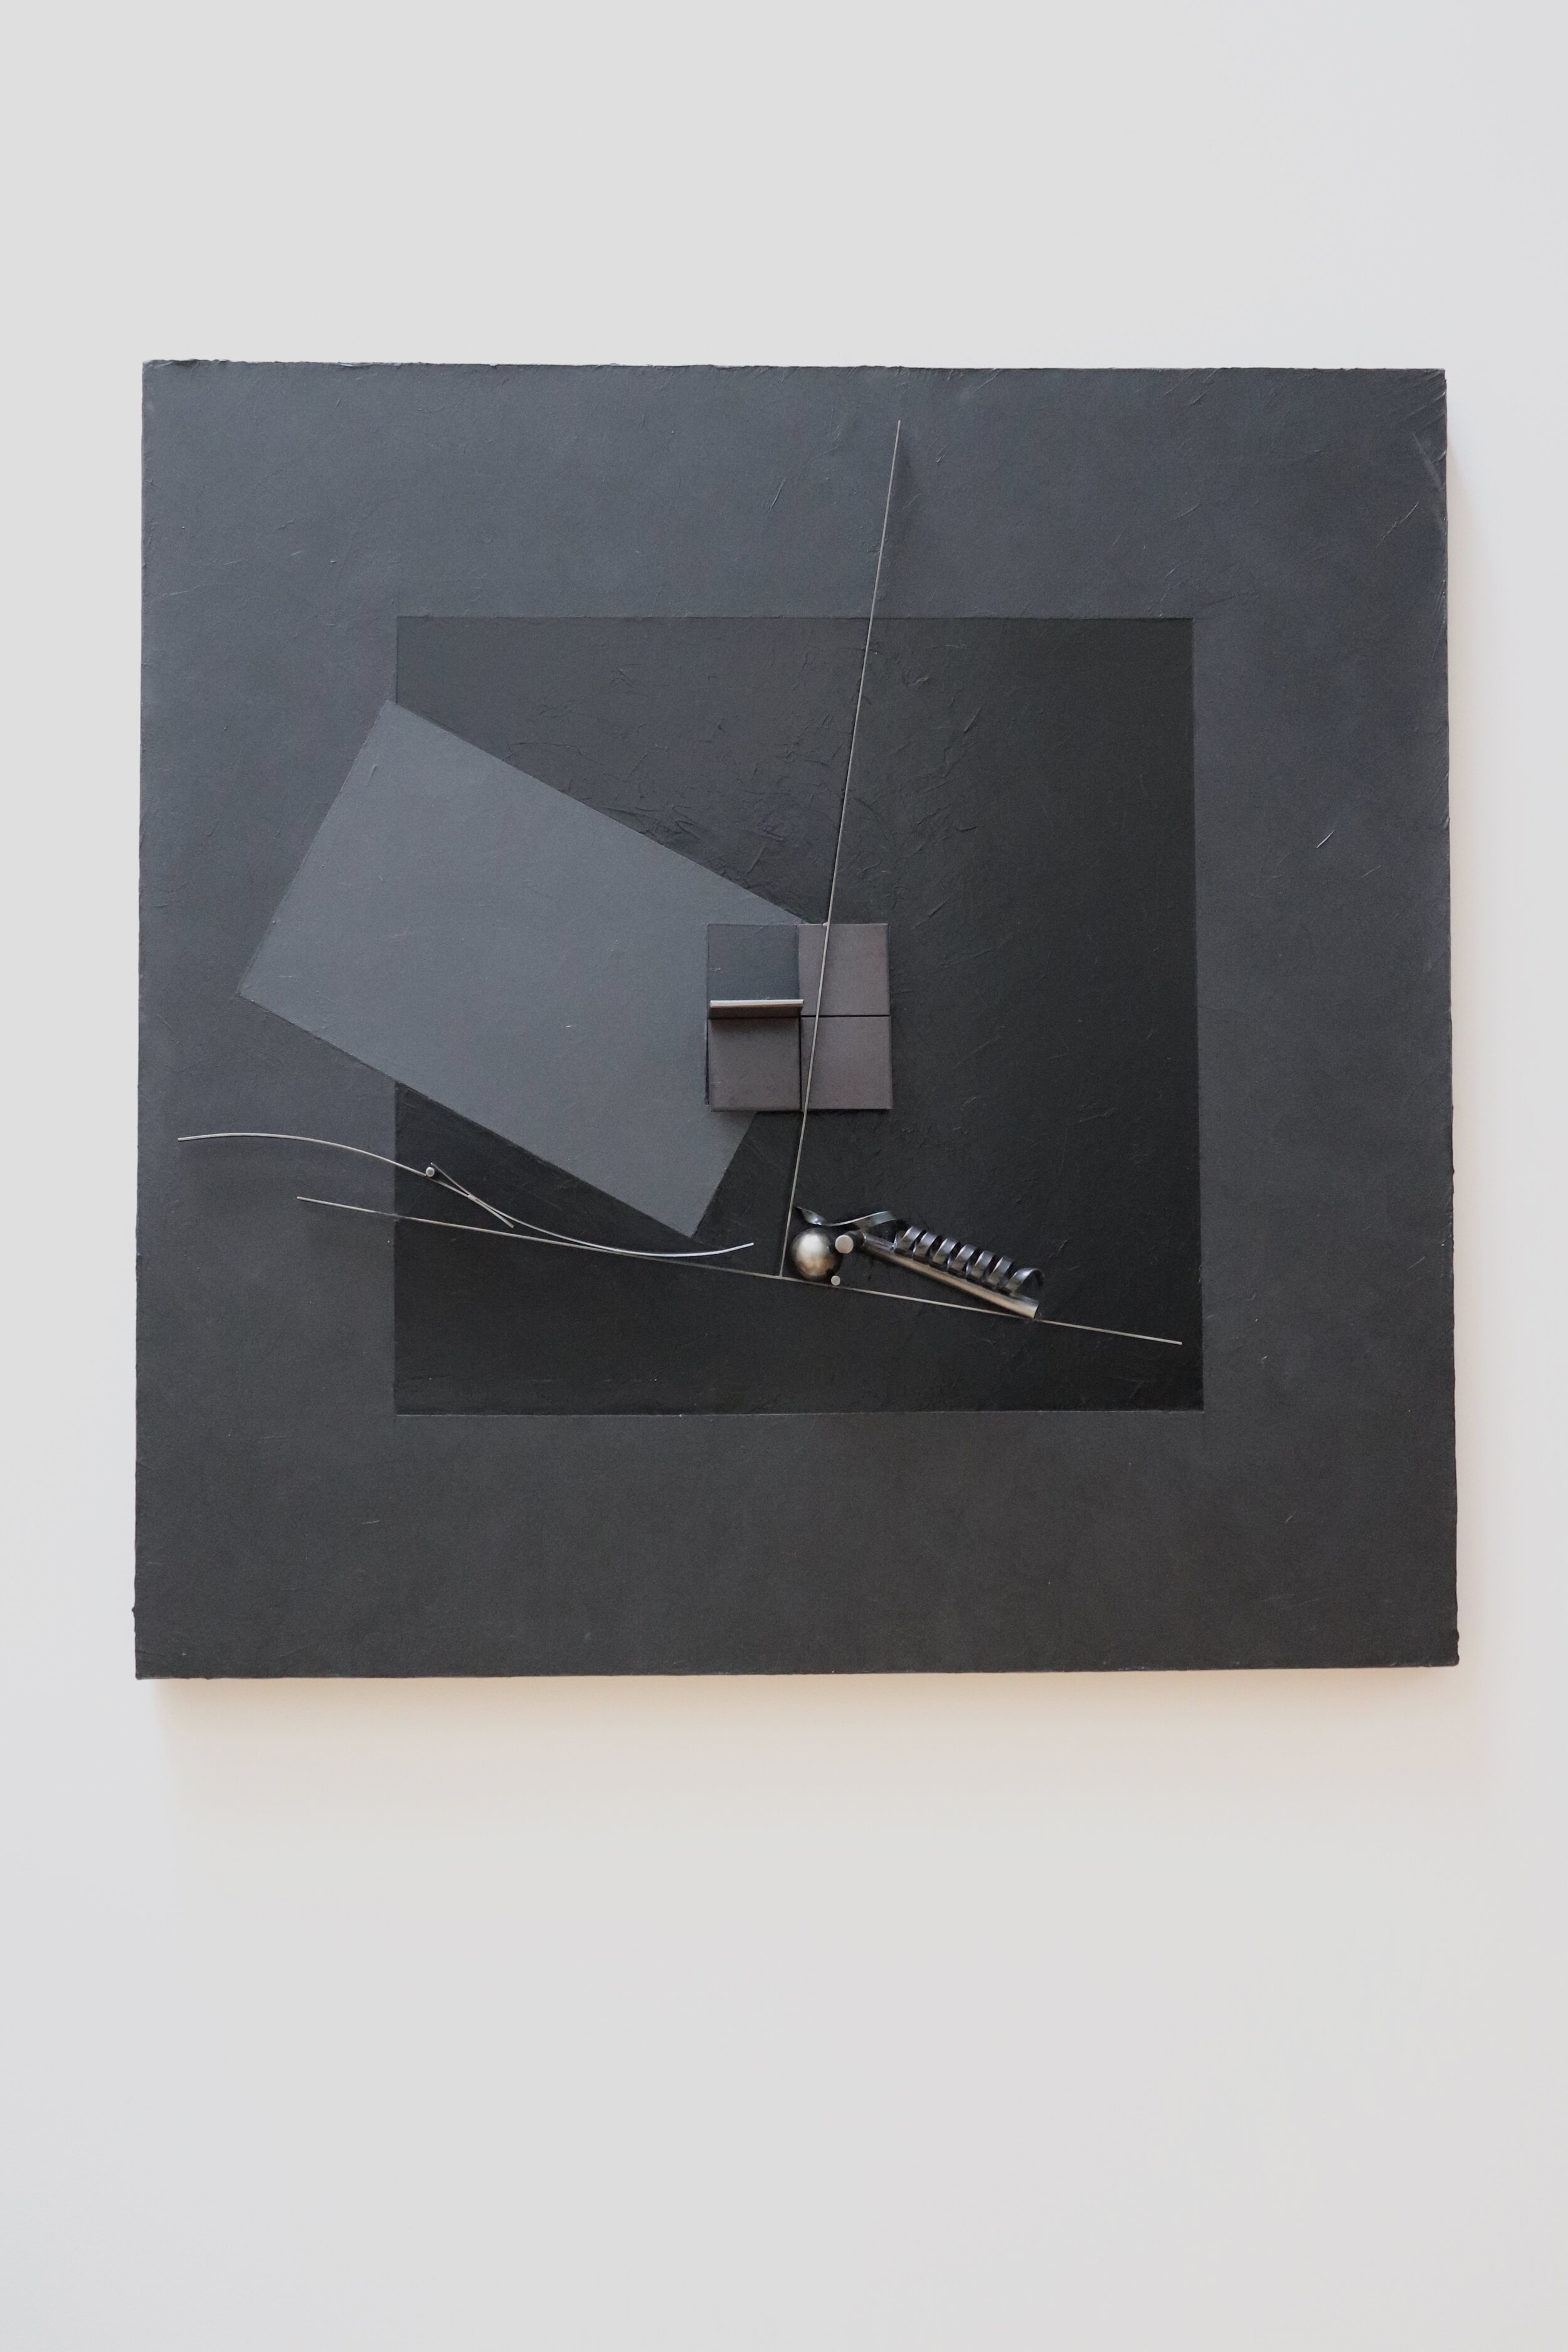 Steel Painting, Black Square No. 5, 2010